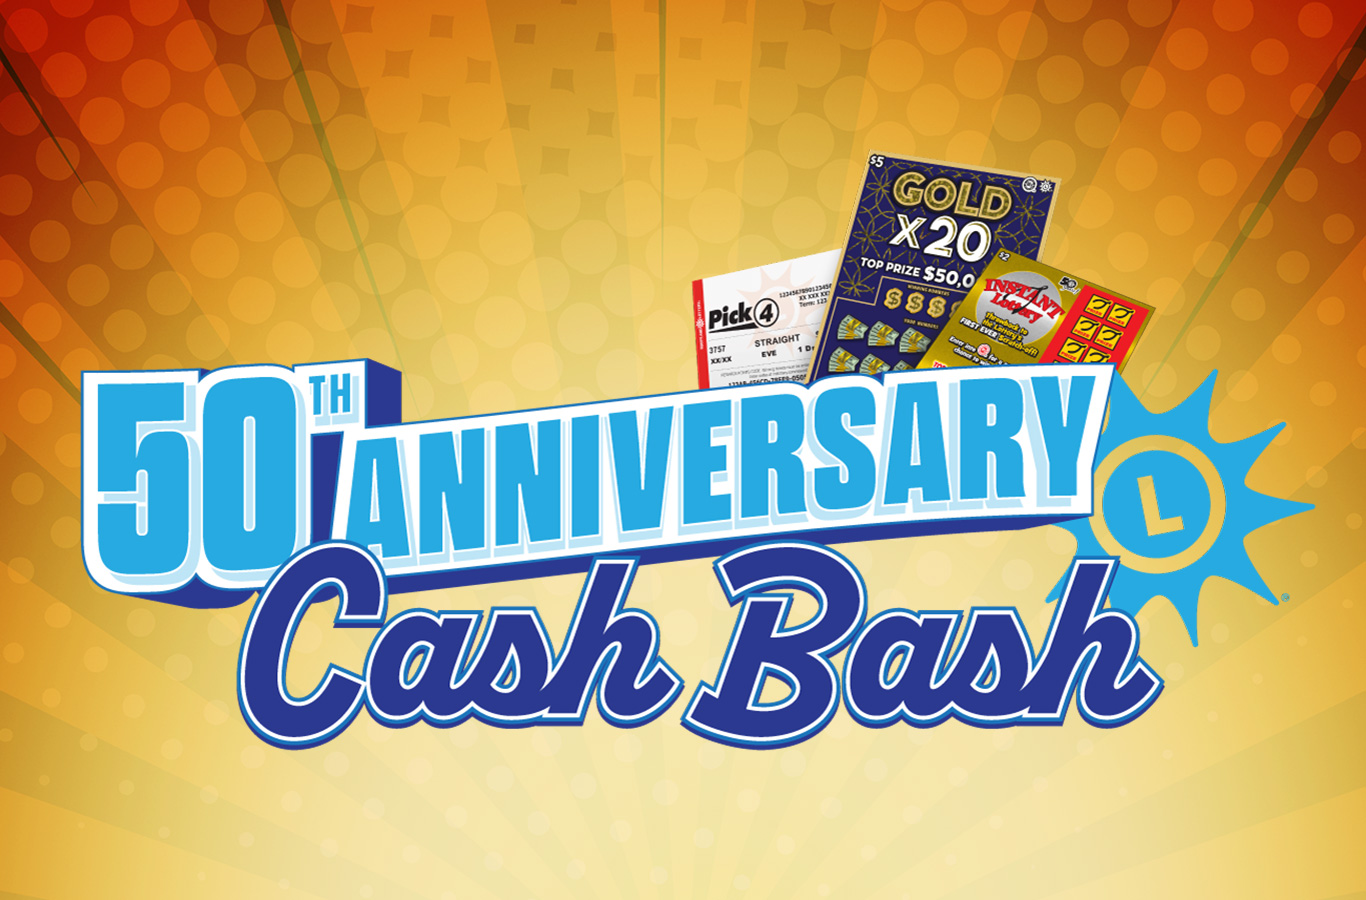 We’re celebrating our 50th Anniversary with an all-games second-chance promotion that gives you a chance to win up to $5 million!